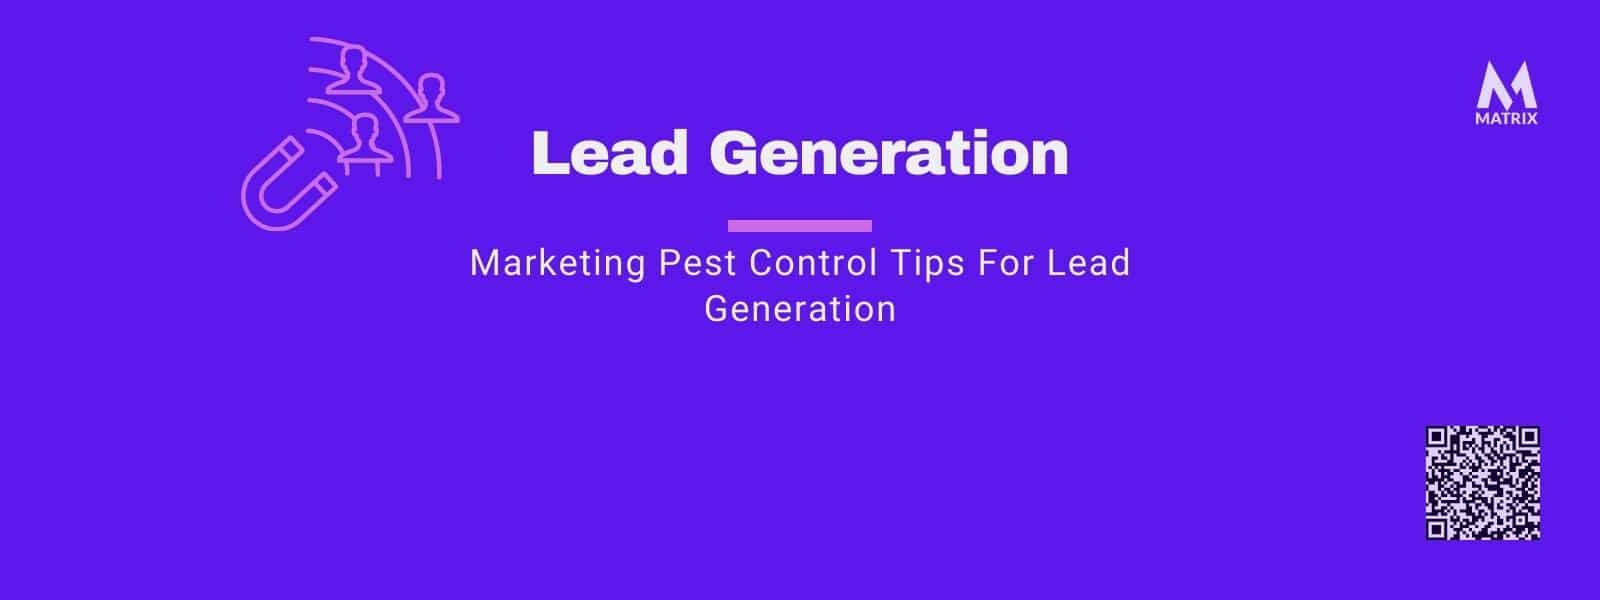 Marketing Pest Control Tips For Lead Generation